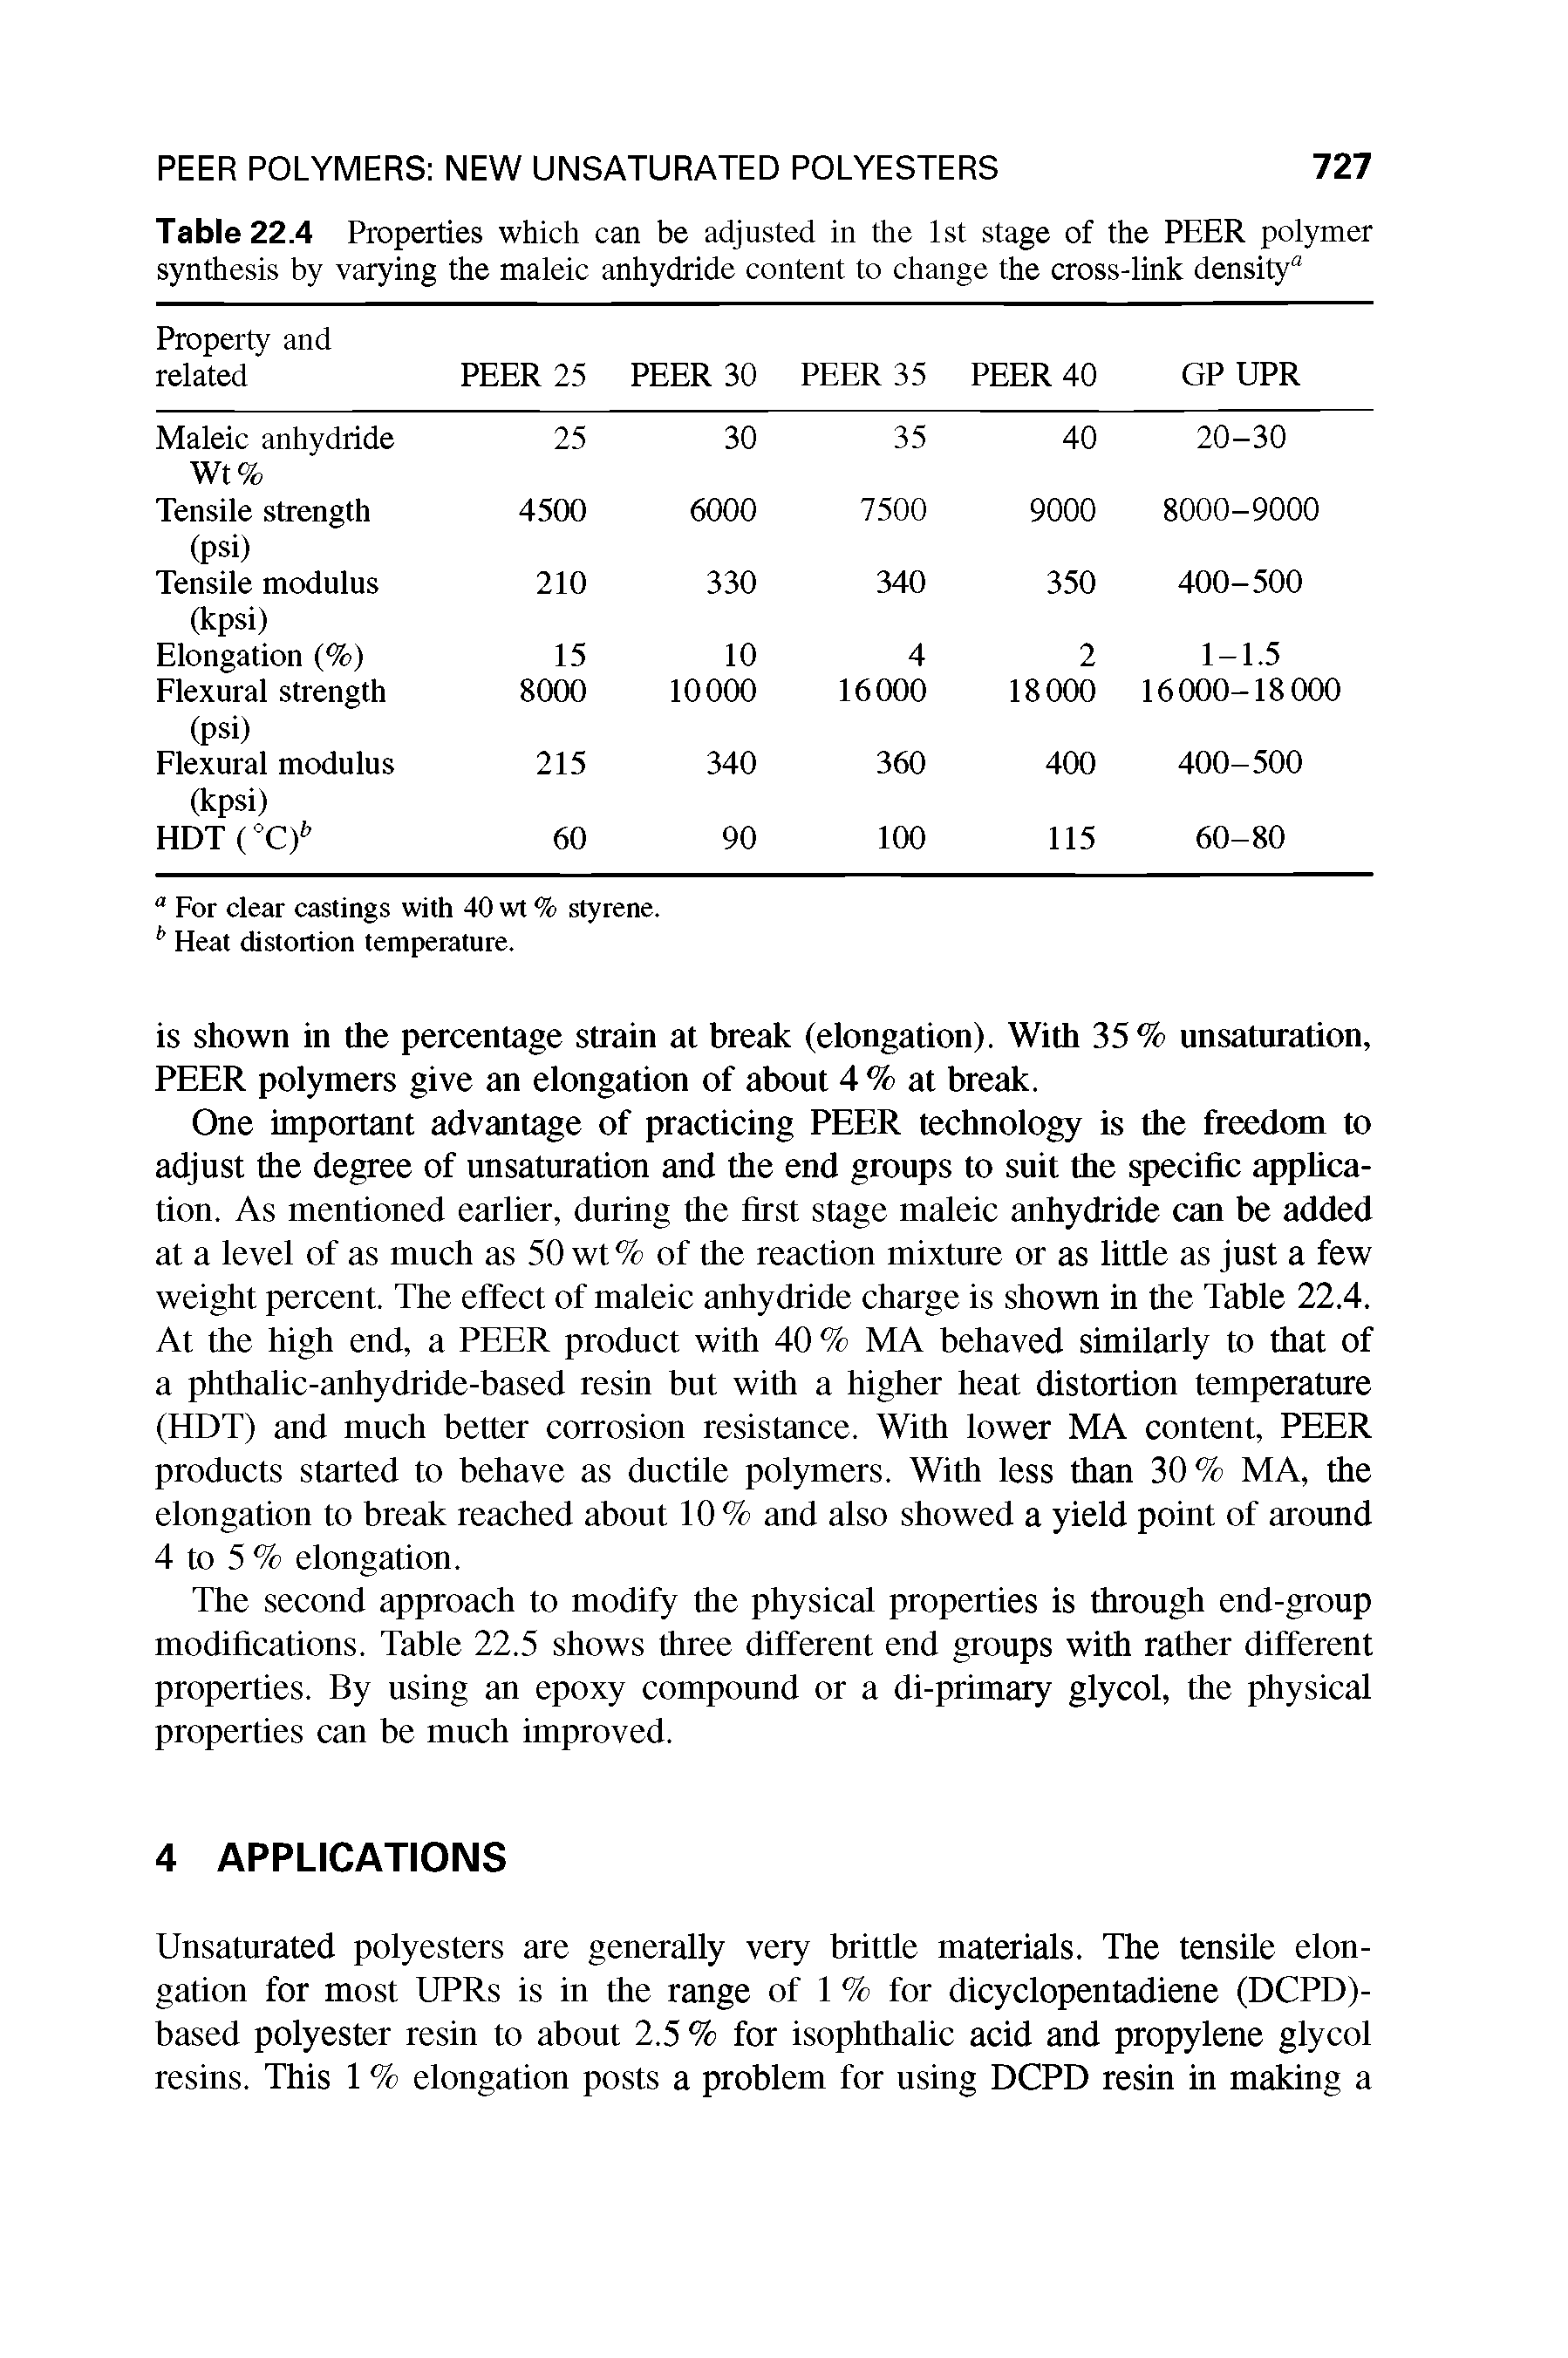 Table 22.4 Properties which can be adjusted in the 1st stage of the PEER polymer synthesis by varying the maleic anhydride content to change the cross-link density0...